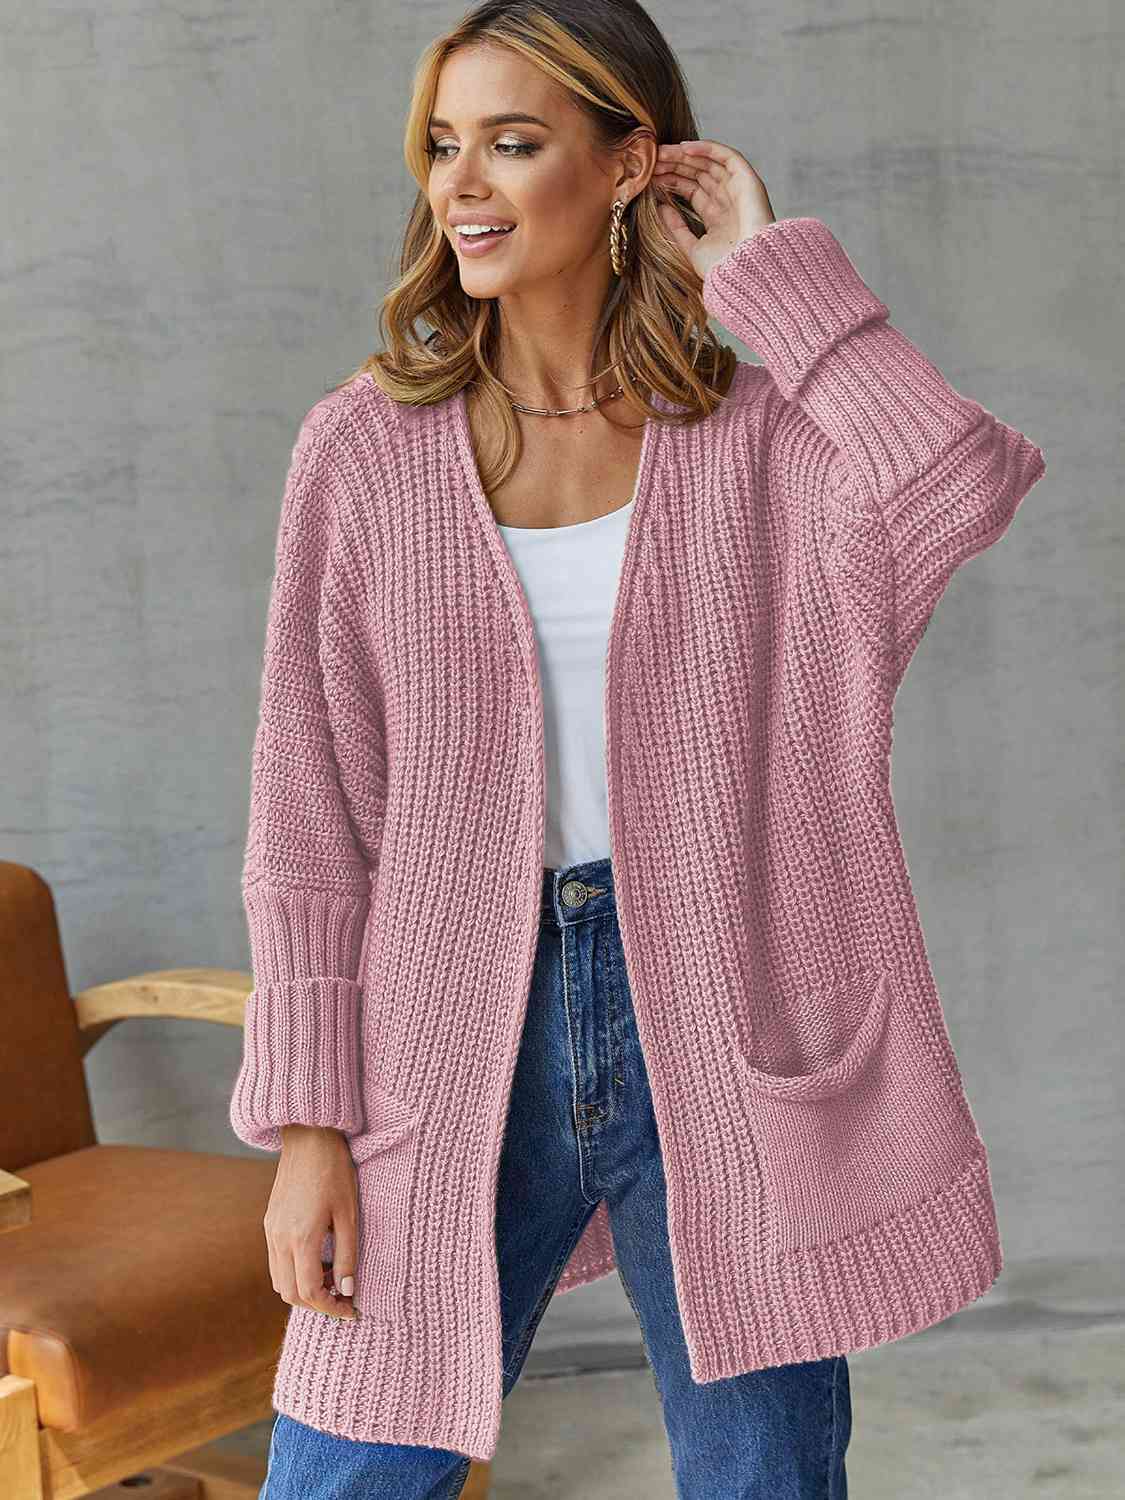 CAICJ98 Womens Sweaters Cardigan Women Cable Knit Cardigan Shawl Collar  Long Sleeve Button Up Sweaters with Pockets Cozy Warm Outwear Pink,M